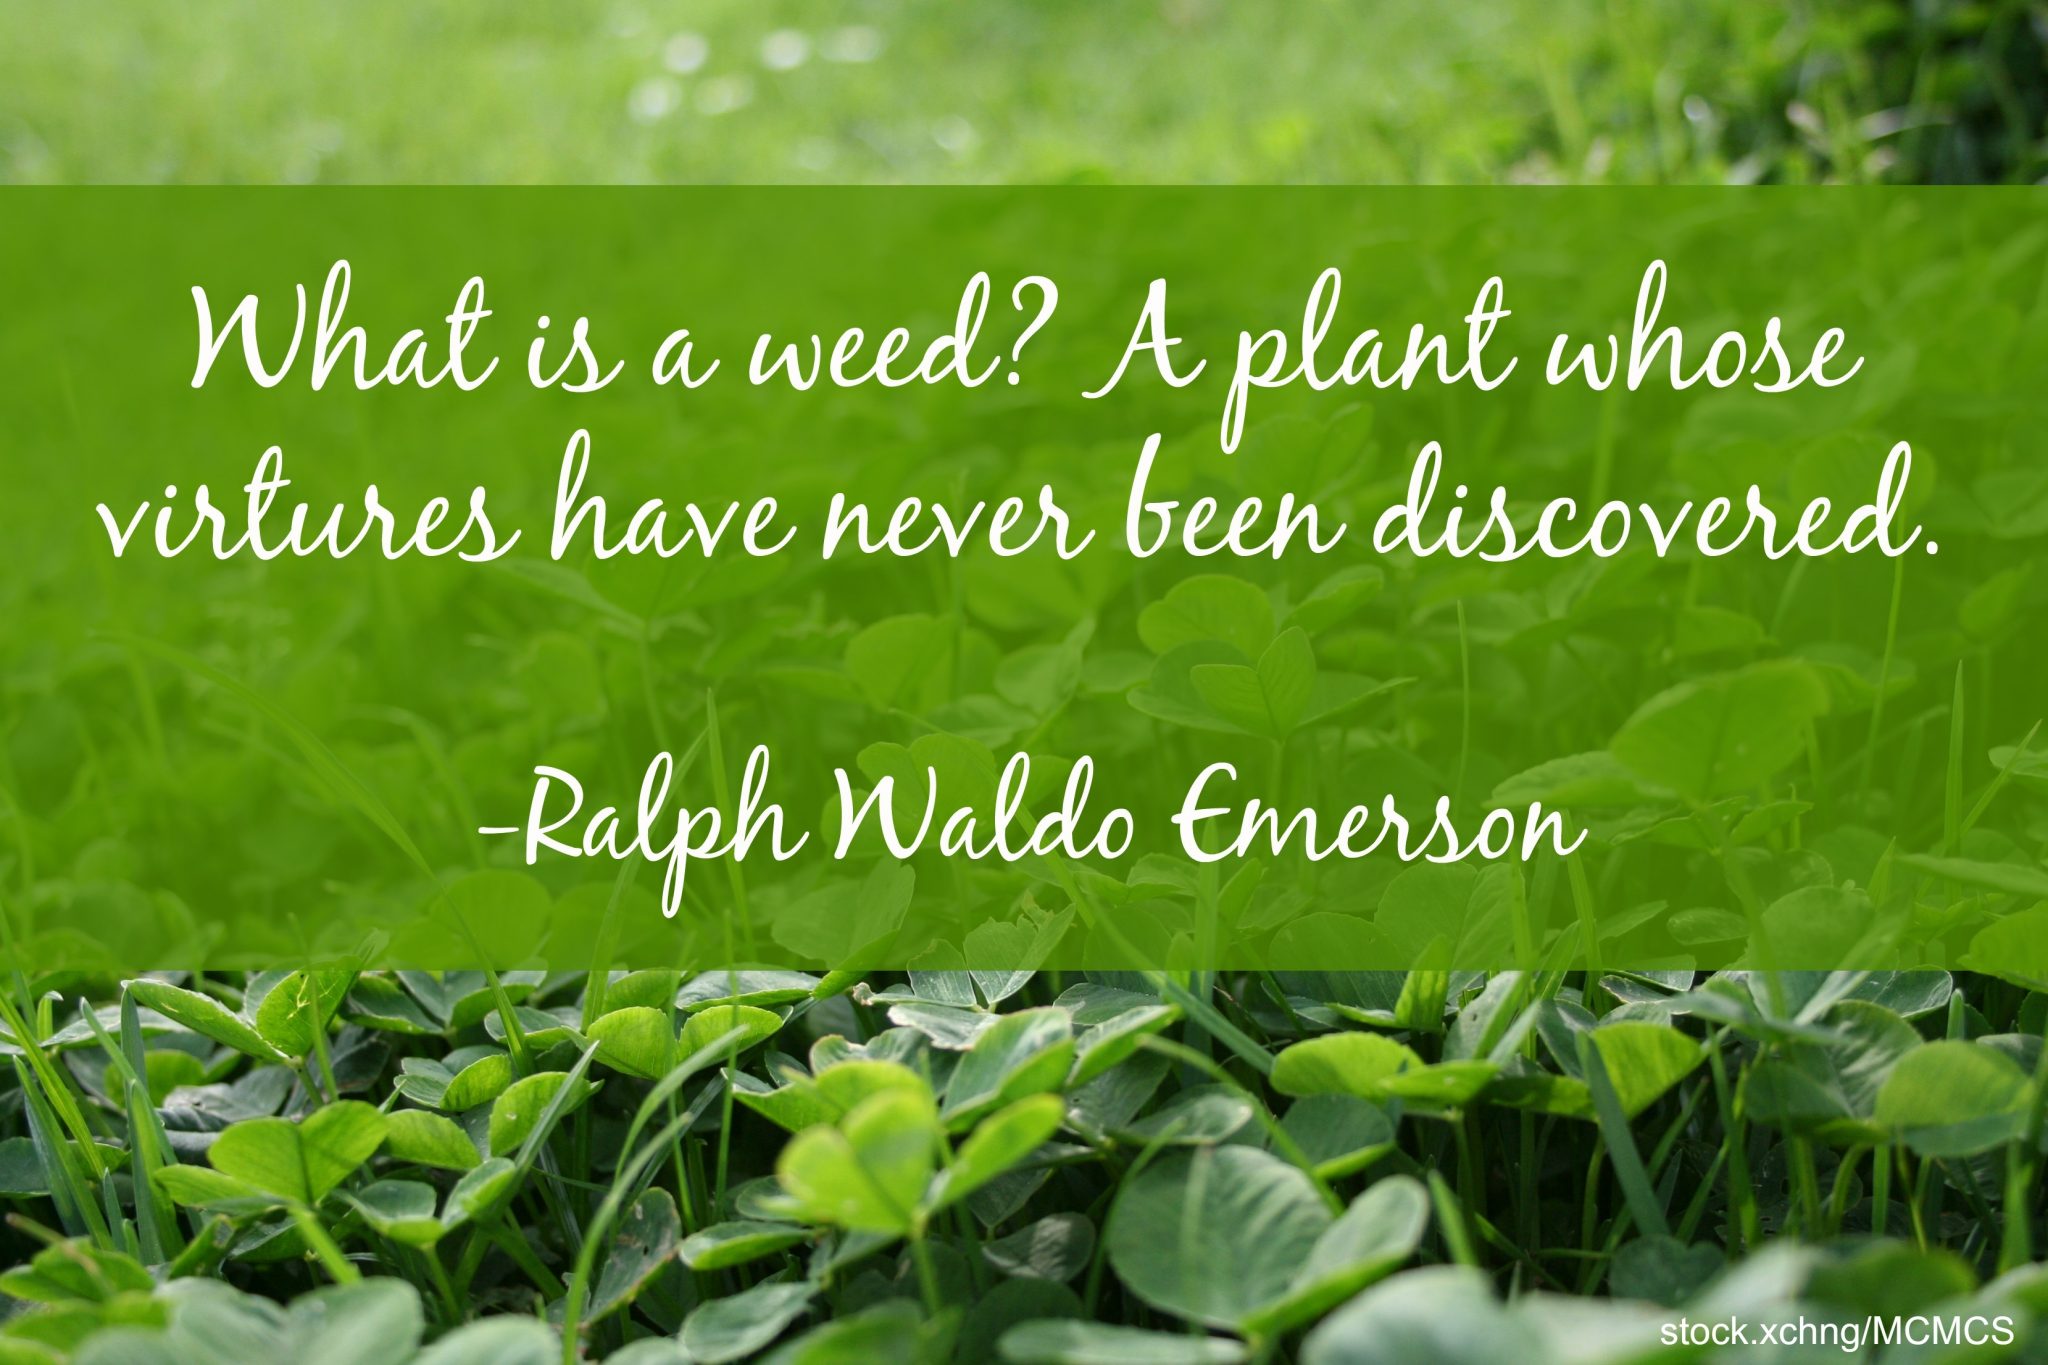 what is a weed. a plant whose virtures have never been discovered. ralph waldo emerson